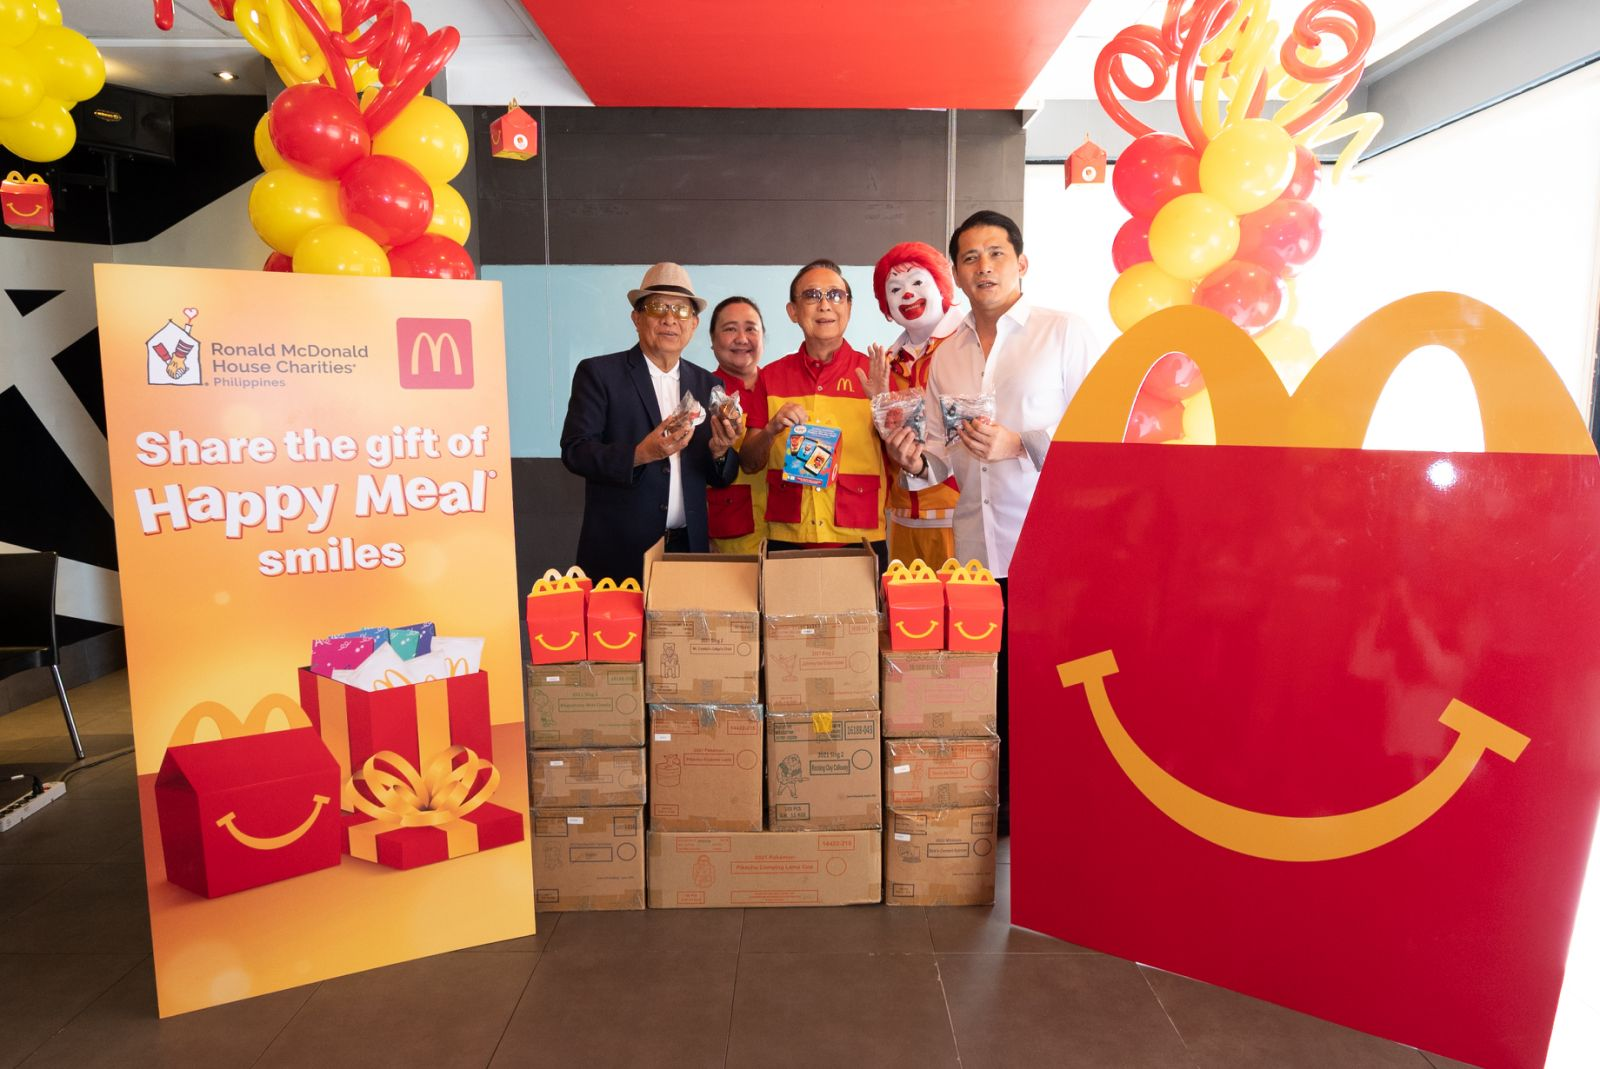 McDonald’s Shares the Light this Christmas by giving back